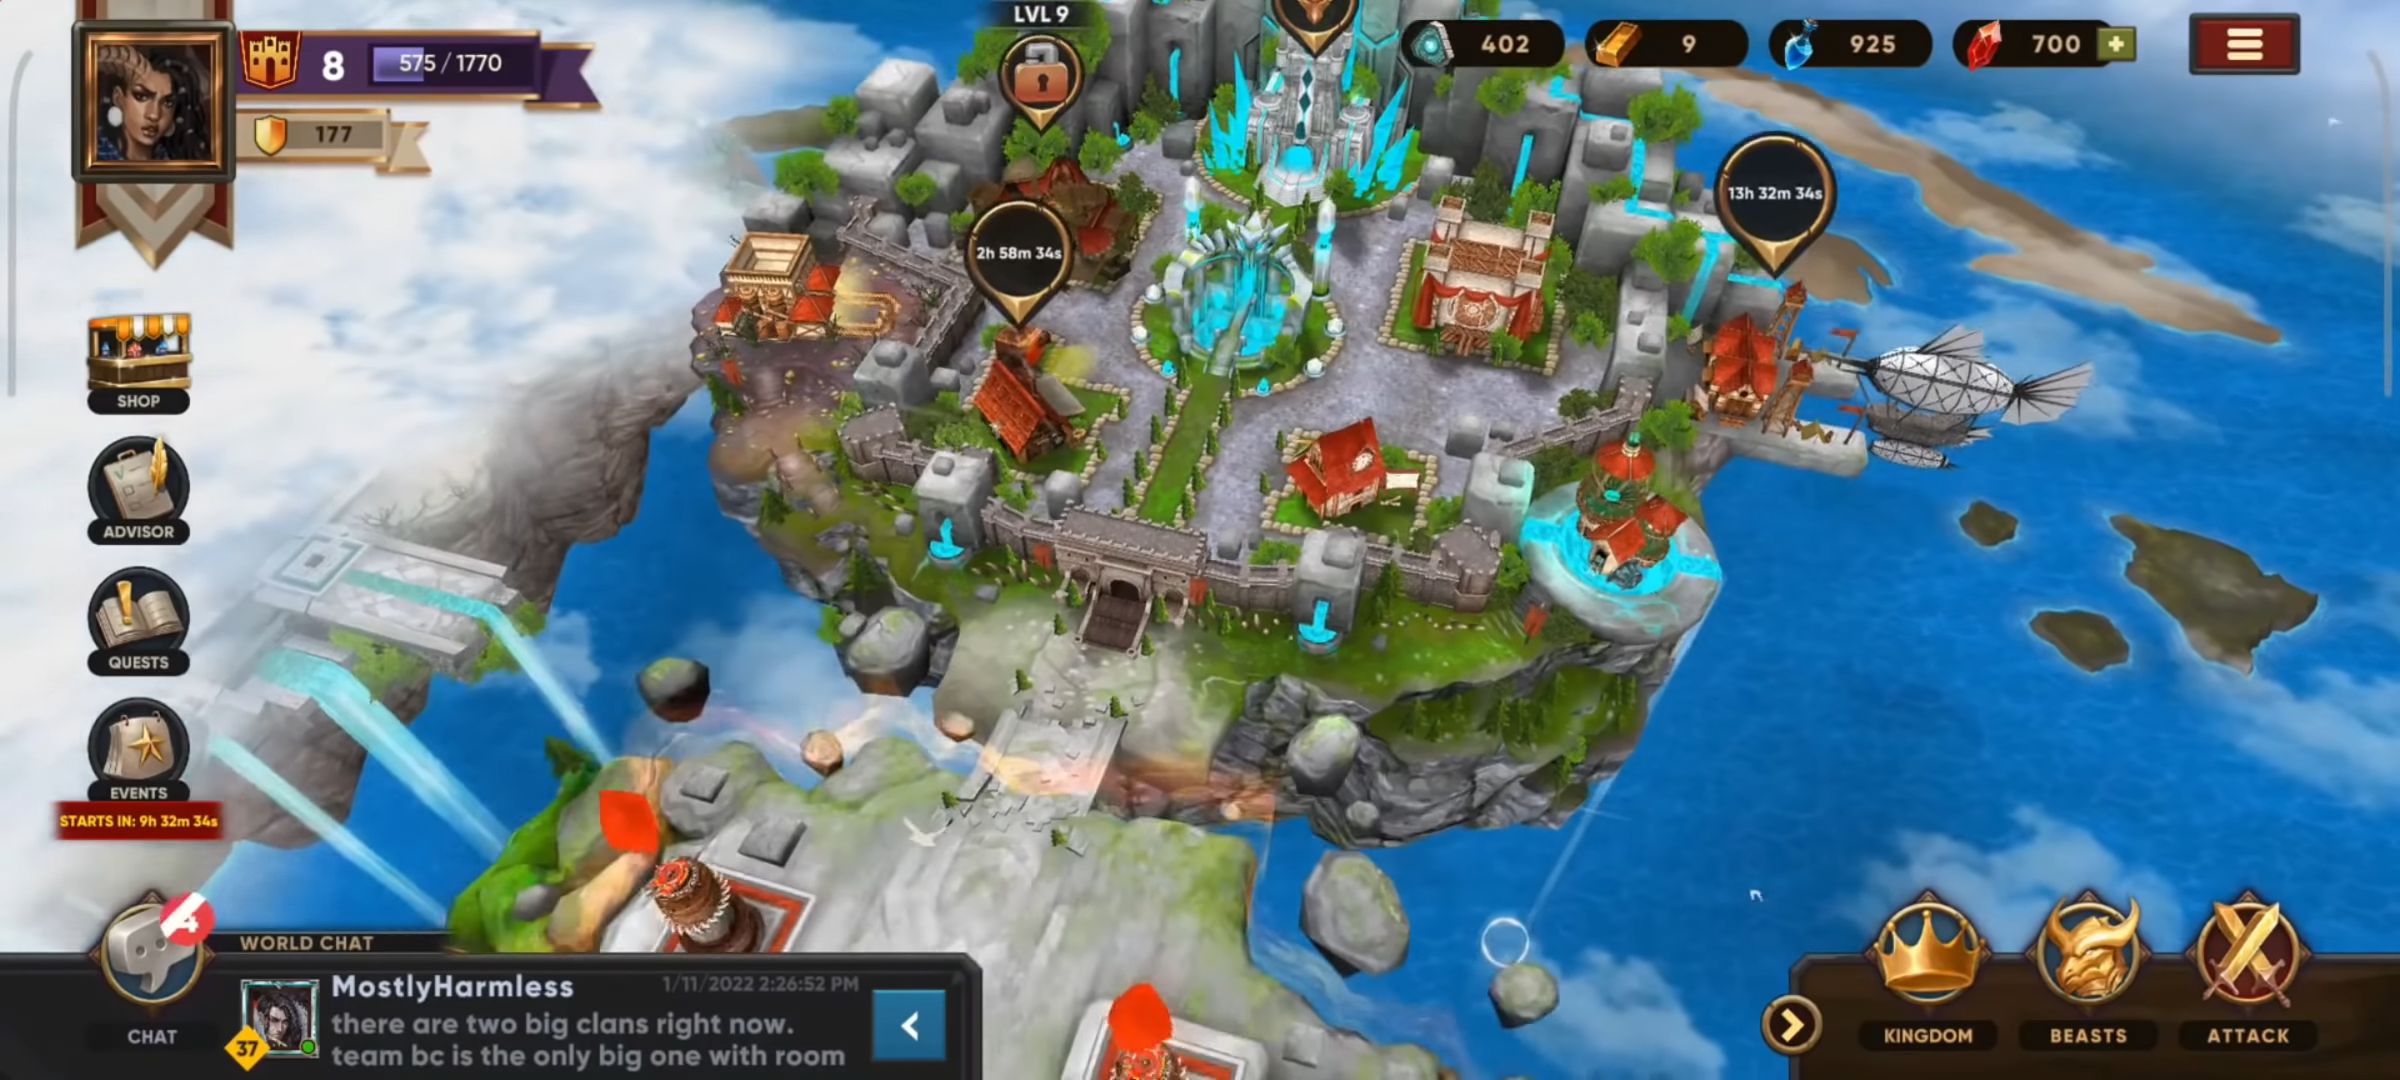 Download Clash of Beasts: Tower Defense Android free game.